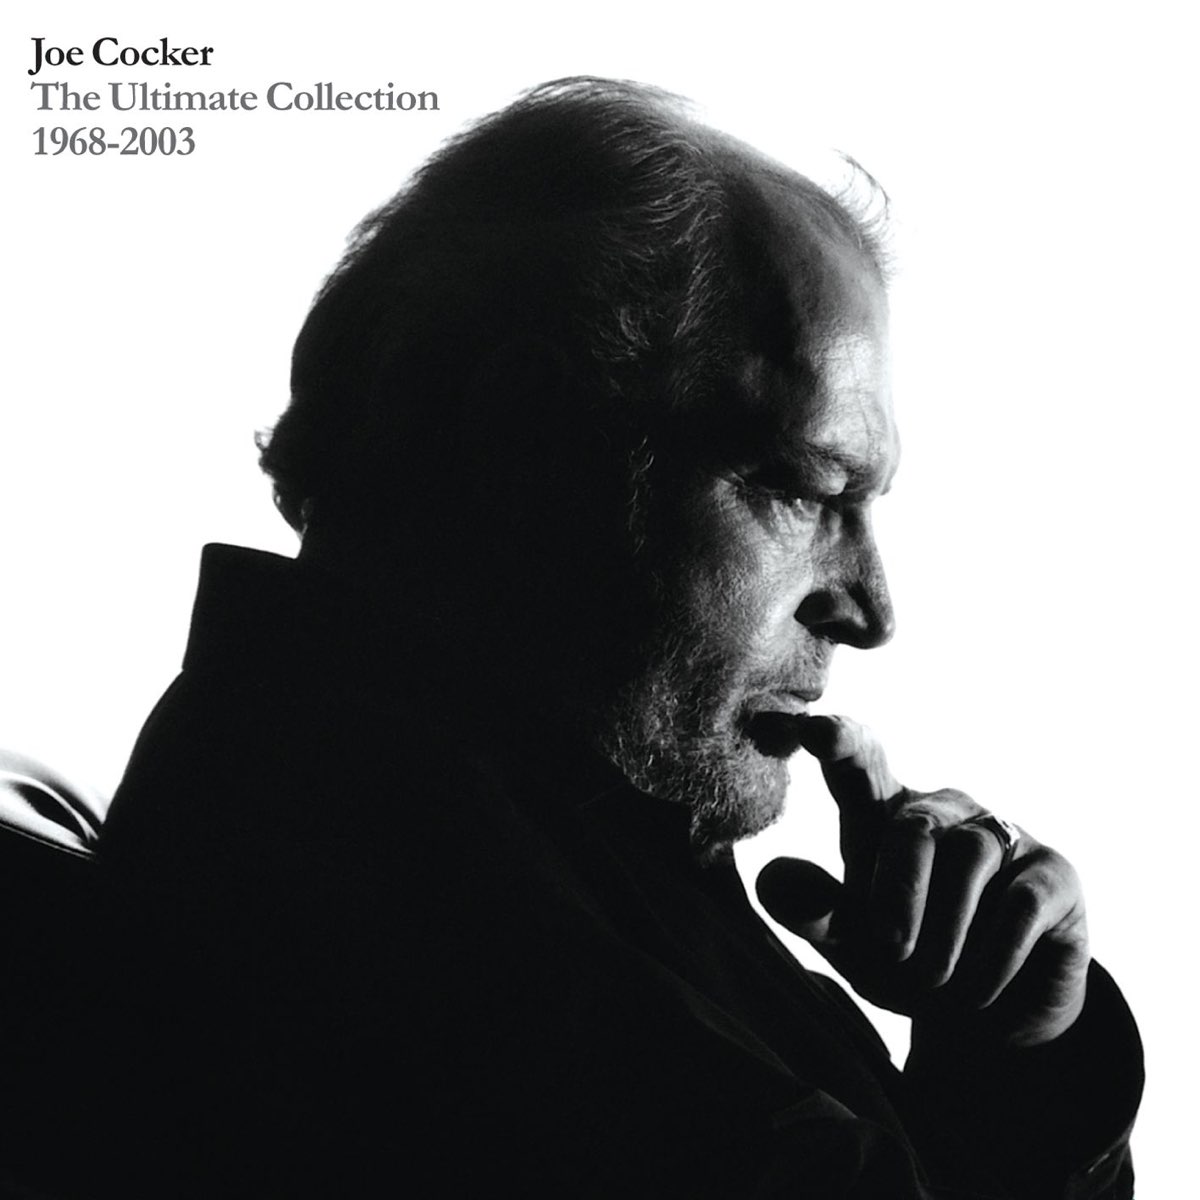 ‎the Ultimate Collection 1968 2003 Album By Joe Cocker Apple Music 